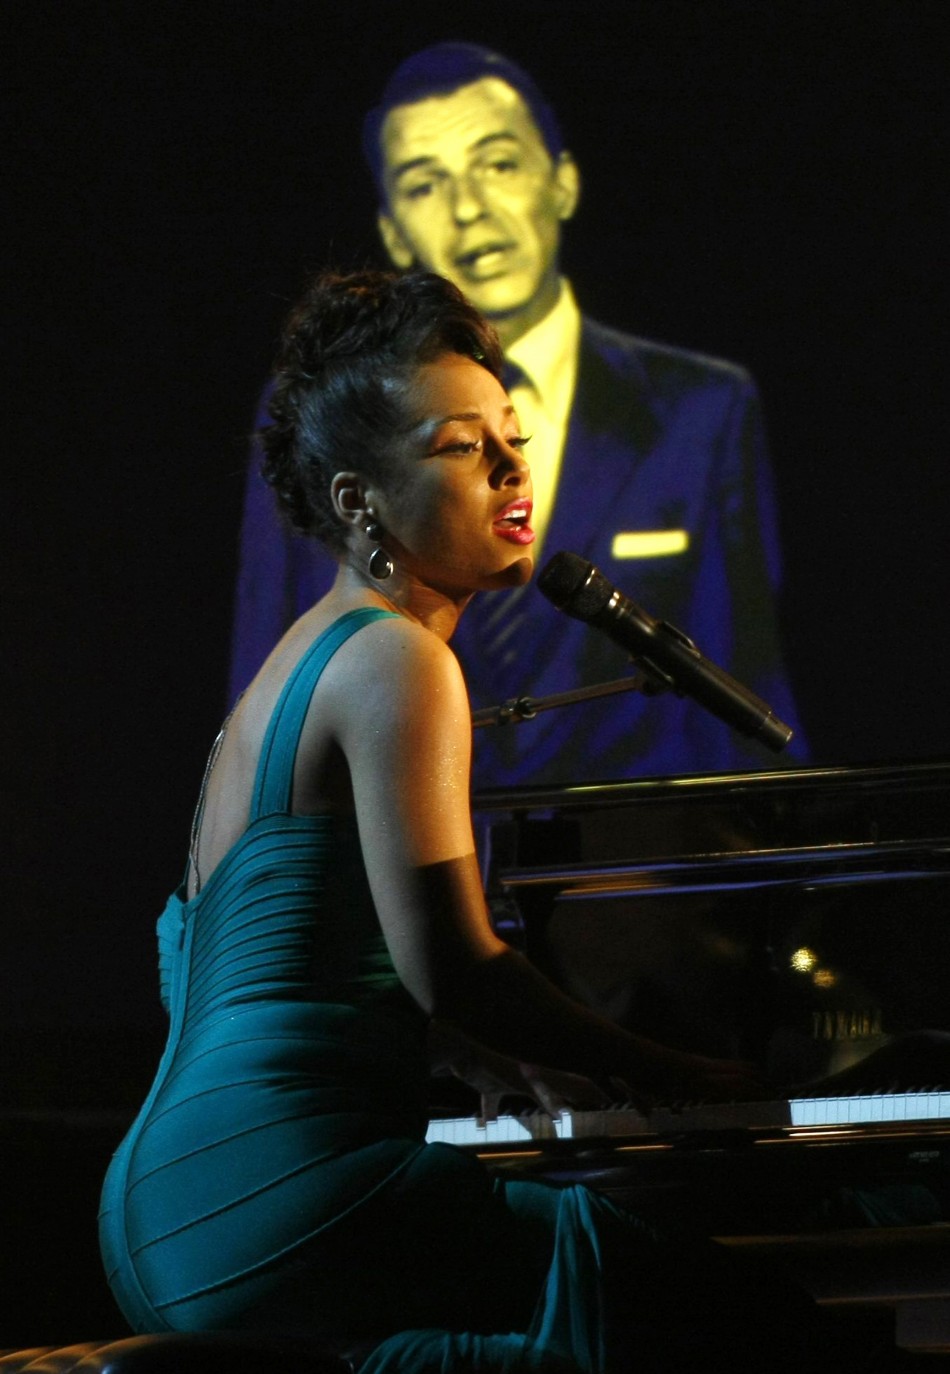 Alicia Keys sings Learnin the Blues with digital Frank Sinatra at 50th annual Grammy Awards in Los Angeles in February